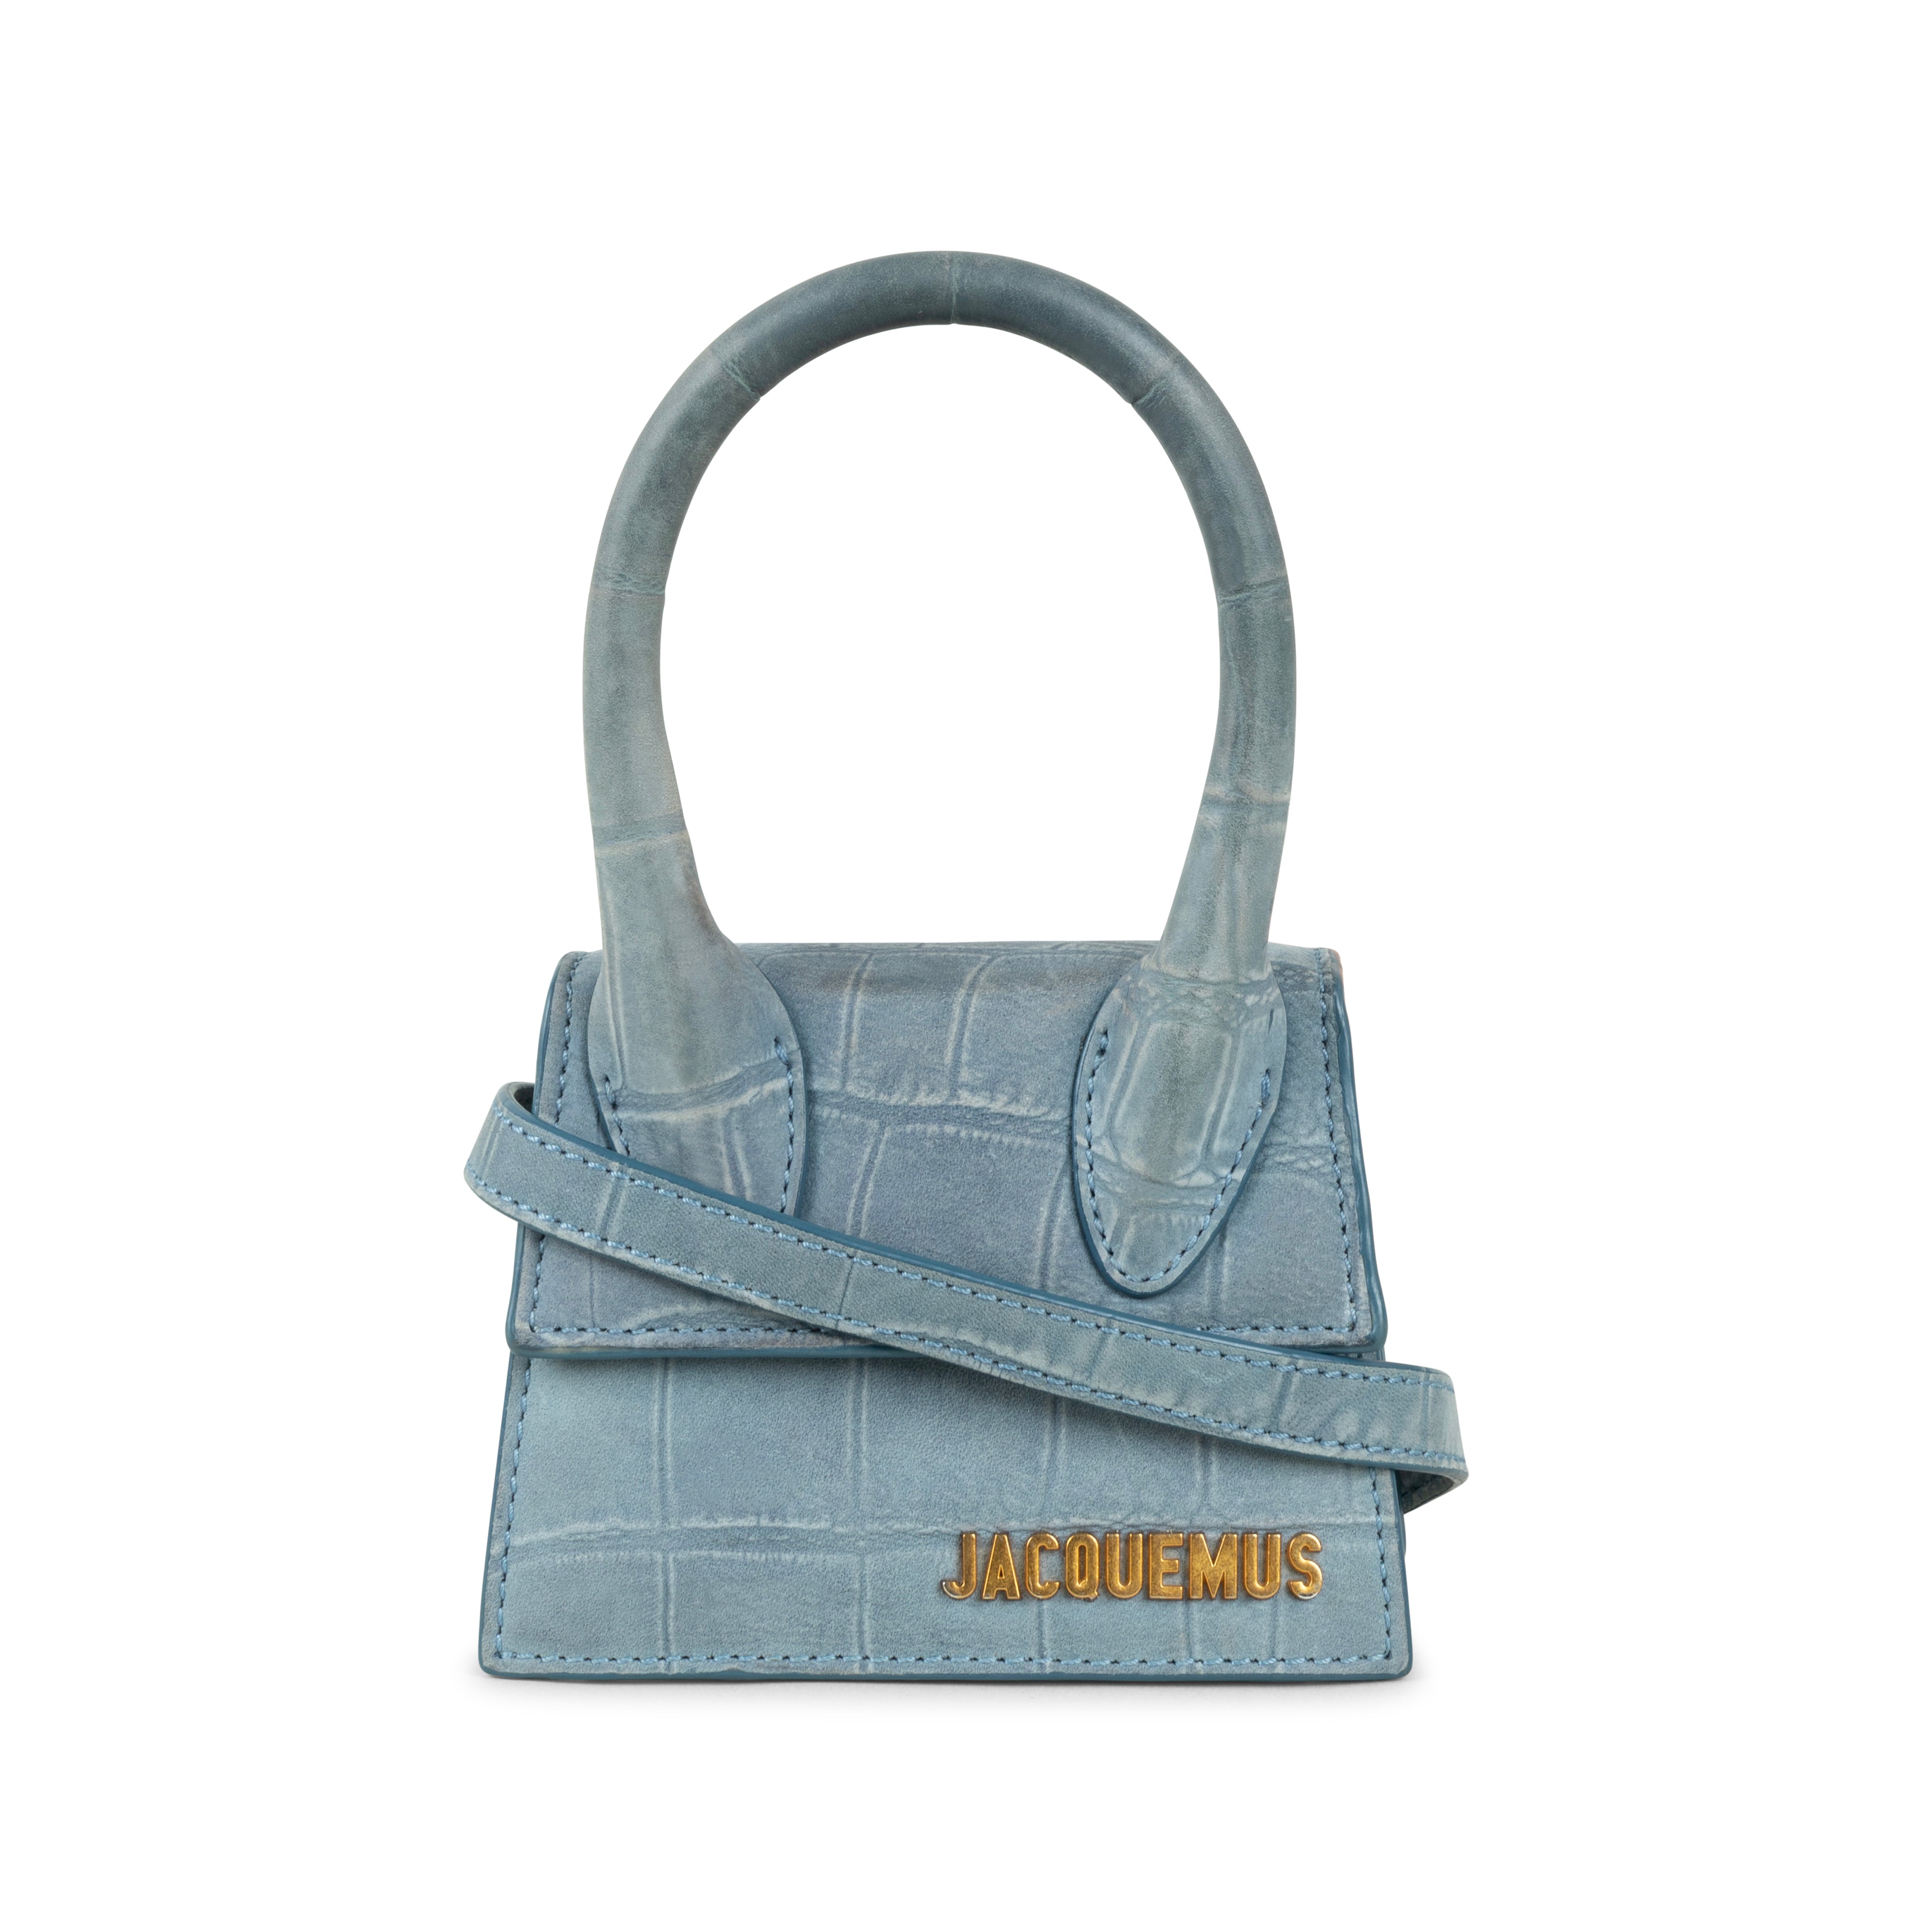 Rent for your upcoming holiday! Jacquemus bag, Jacquemus tassen, Jacquemus